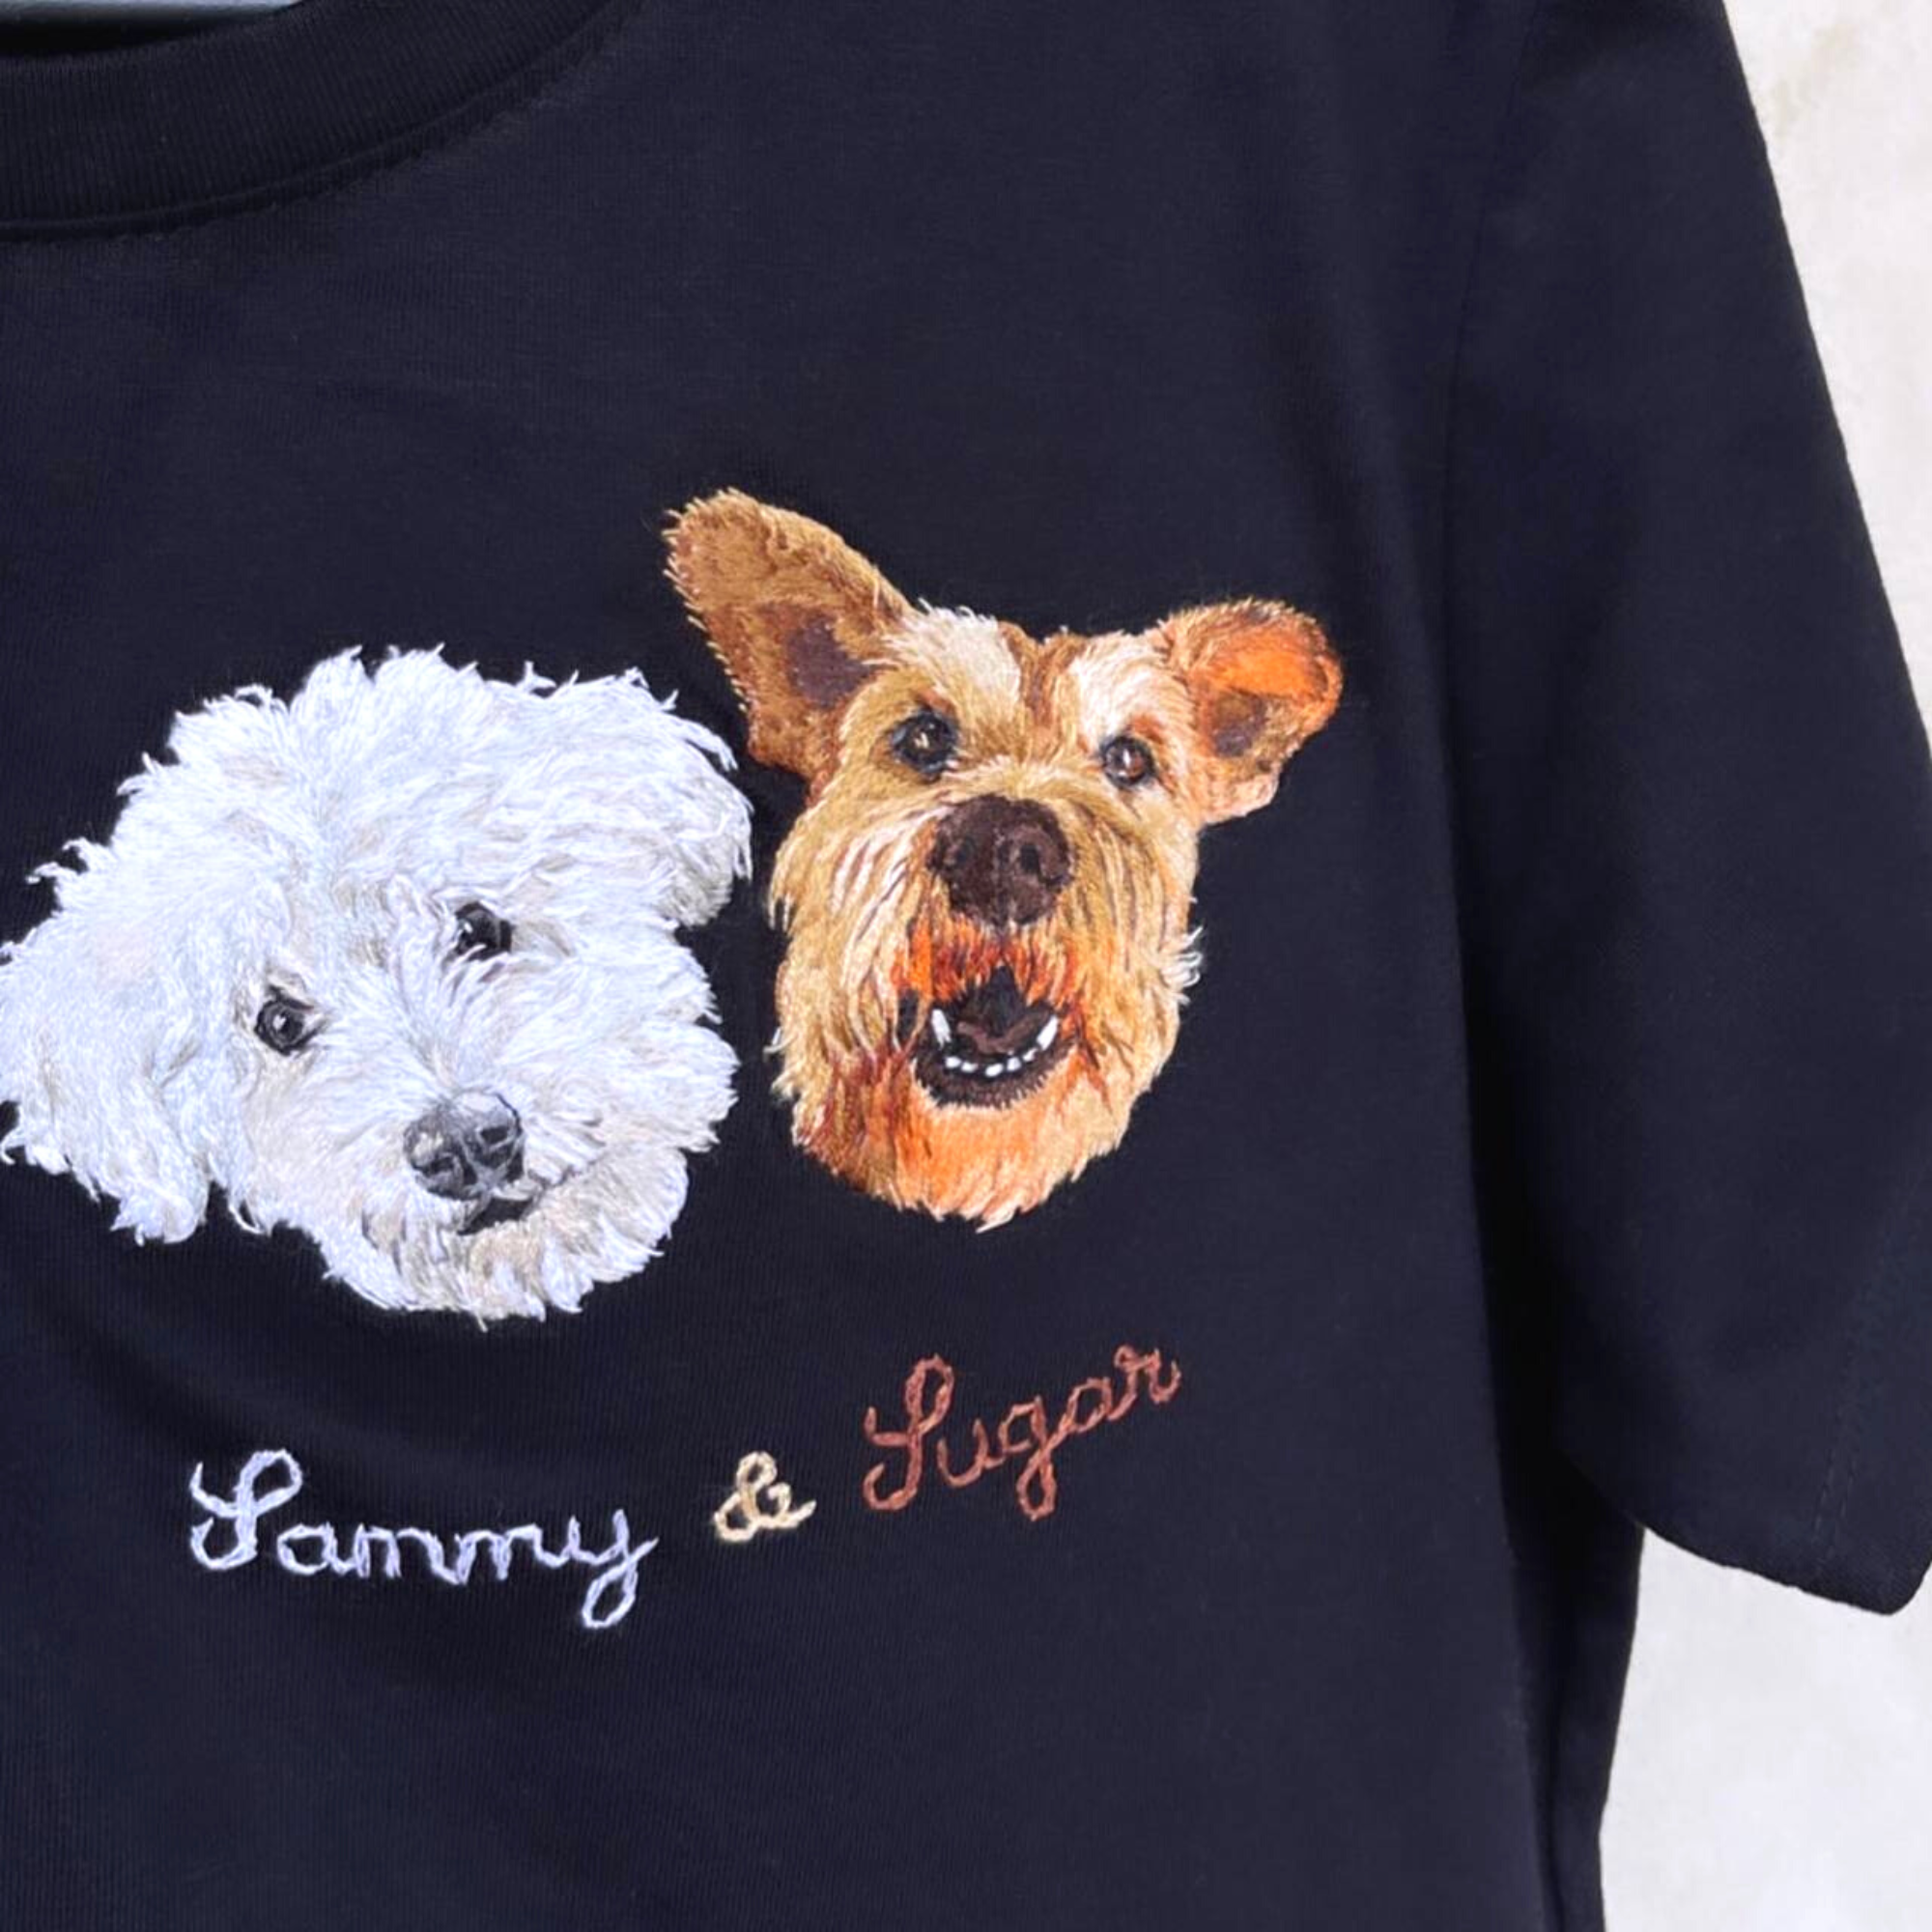 Hand Embroidered Pet Portrait T-shirt